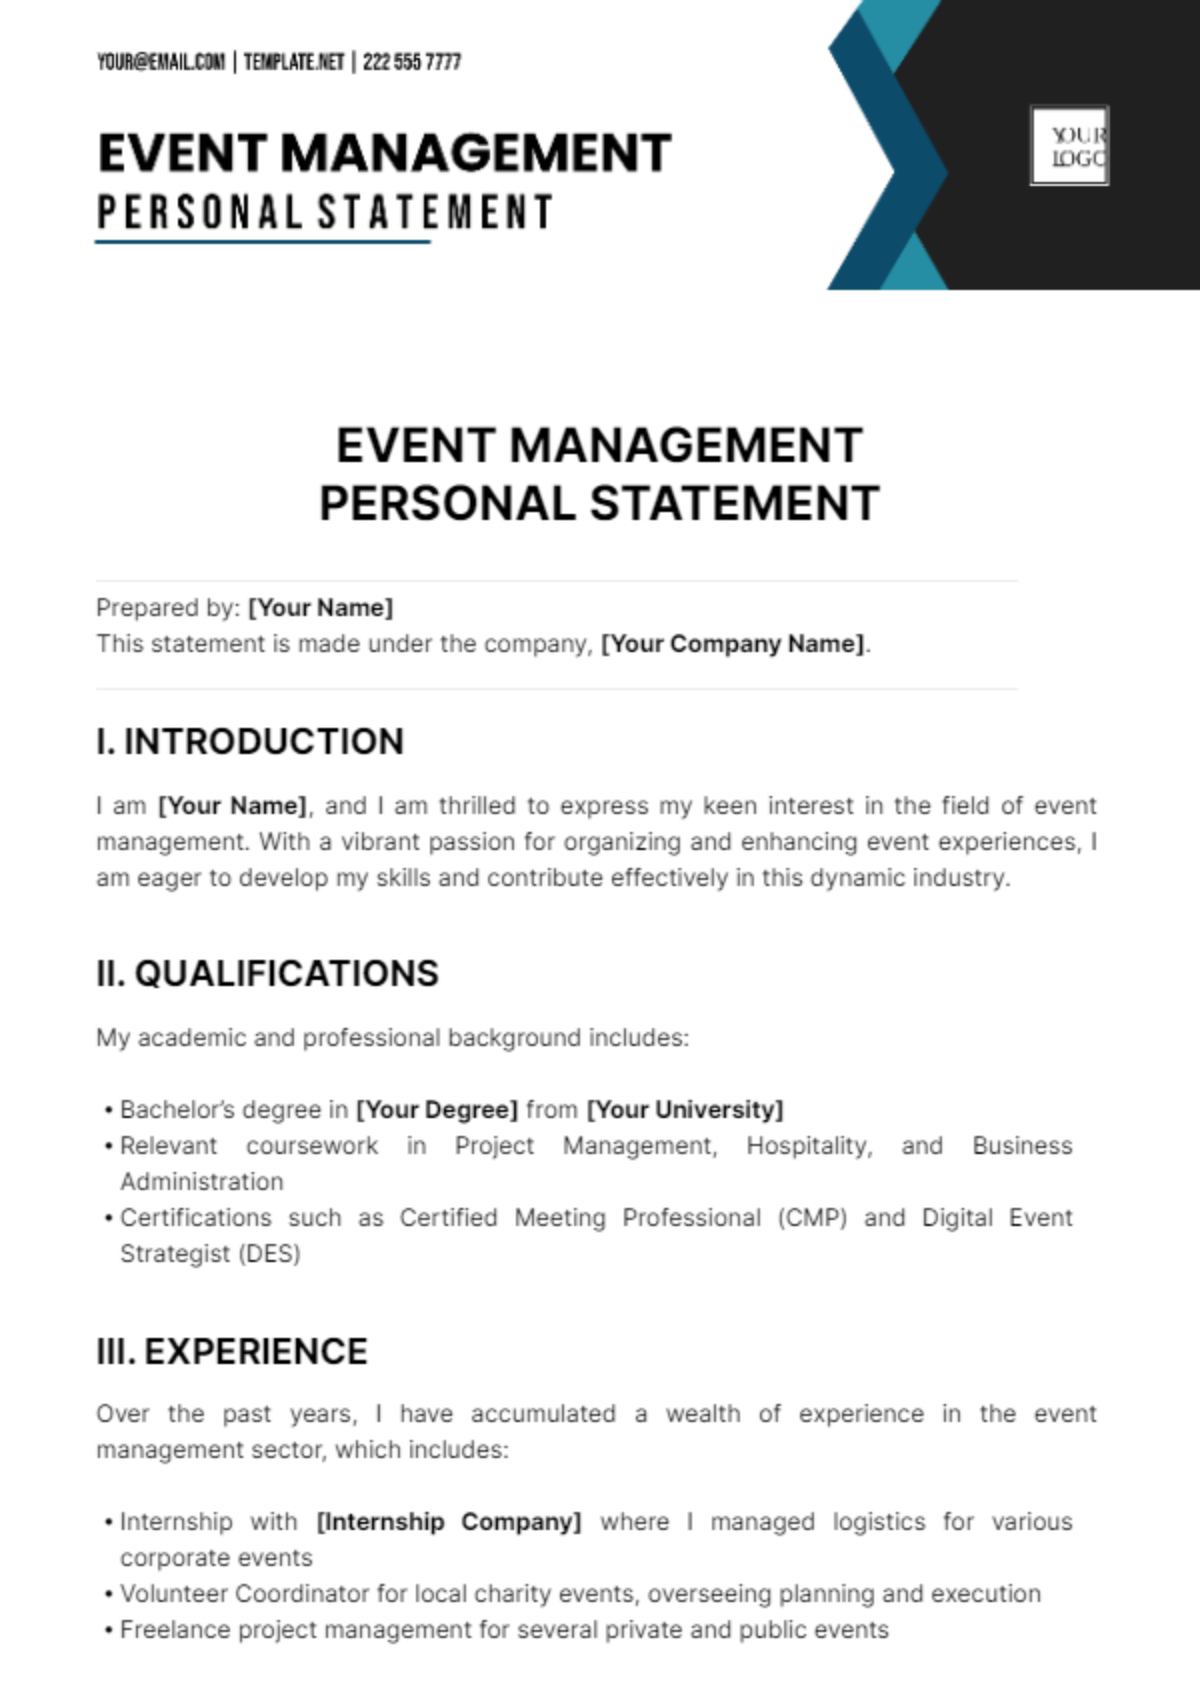 Event Management Personal Statement Template